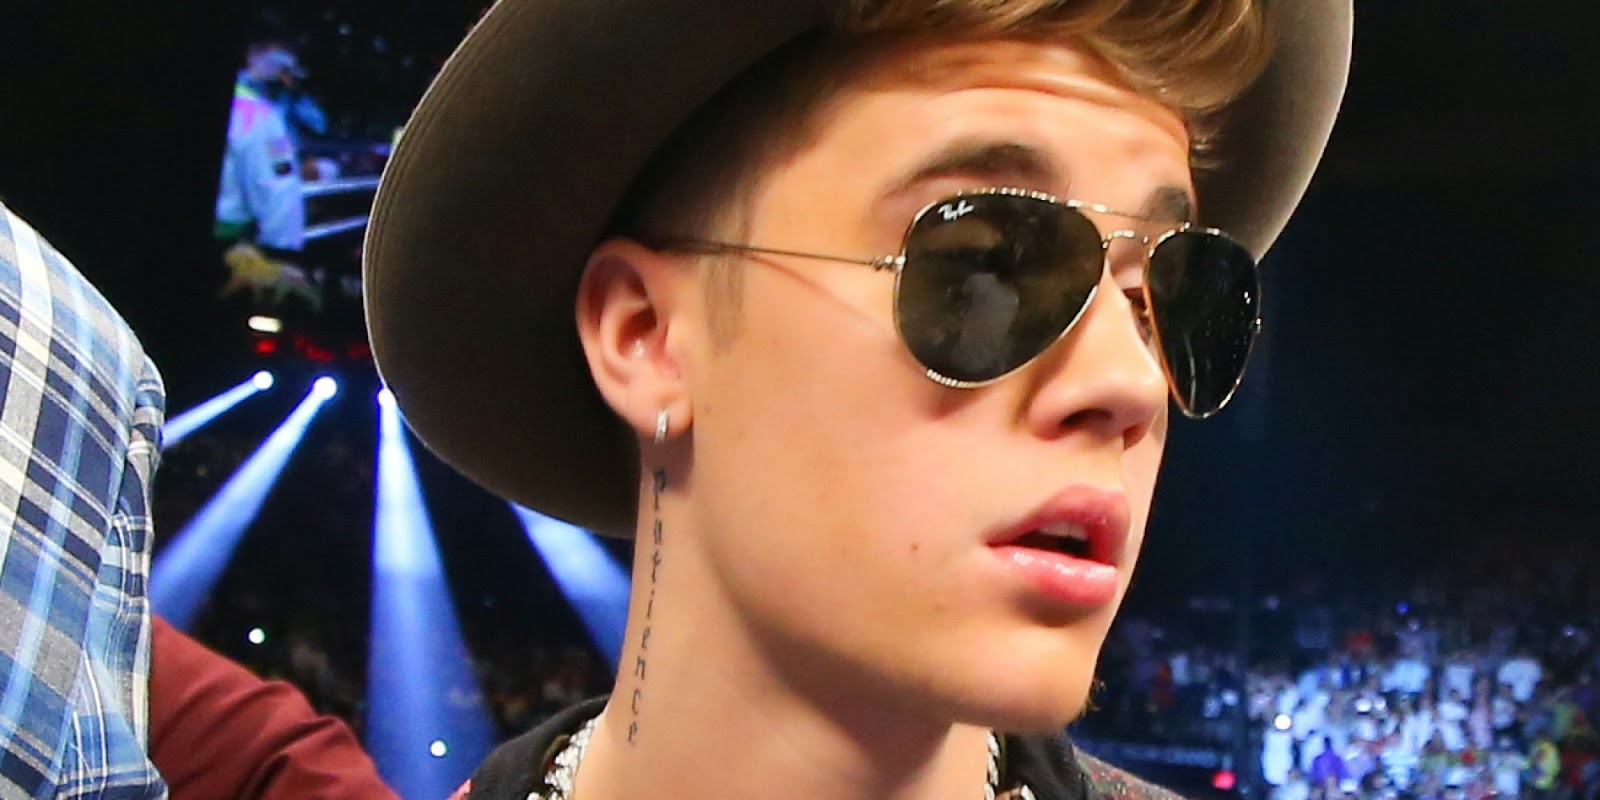 Justin Bieber Latest HD Wallpapers of 2015 Celebrity Hd Wallpapers